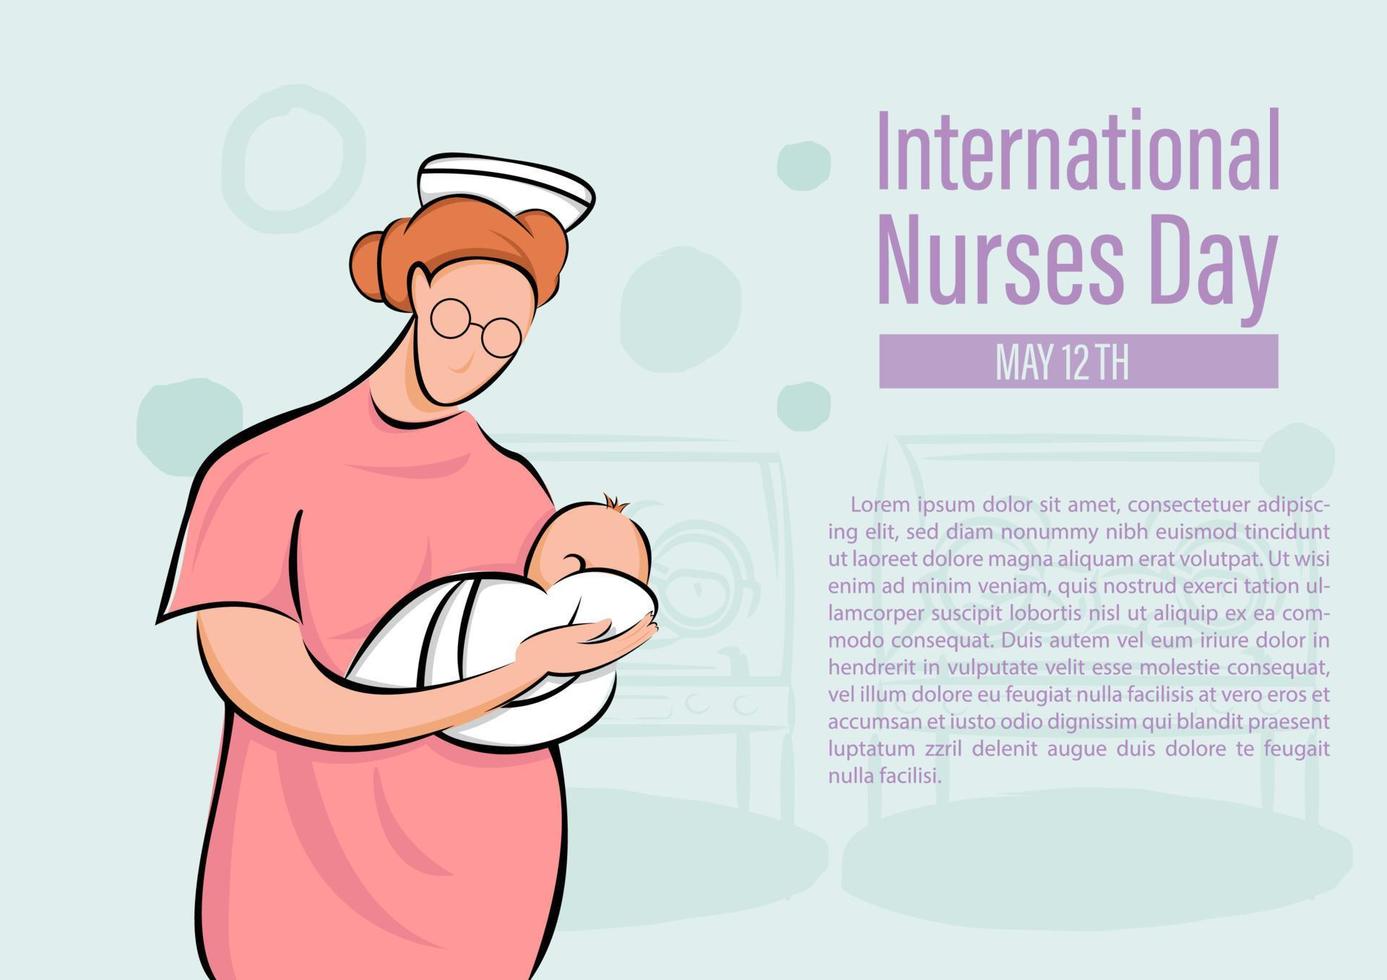 Neonatal's nurse with new born baby and International Nurse Day and May 12th lettering, example texts on light green baby incubator and abstract circle background. vector